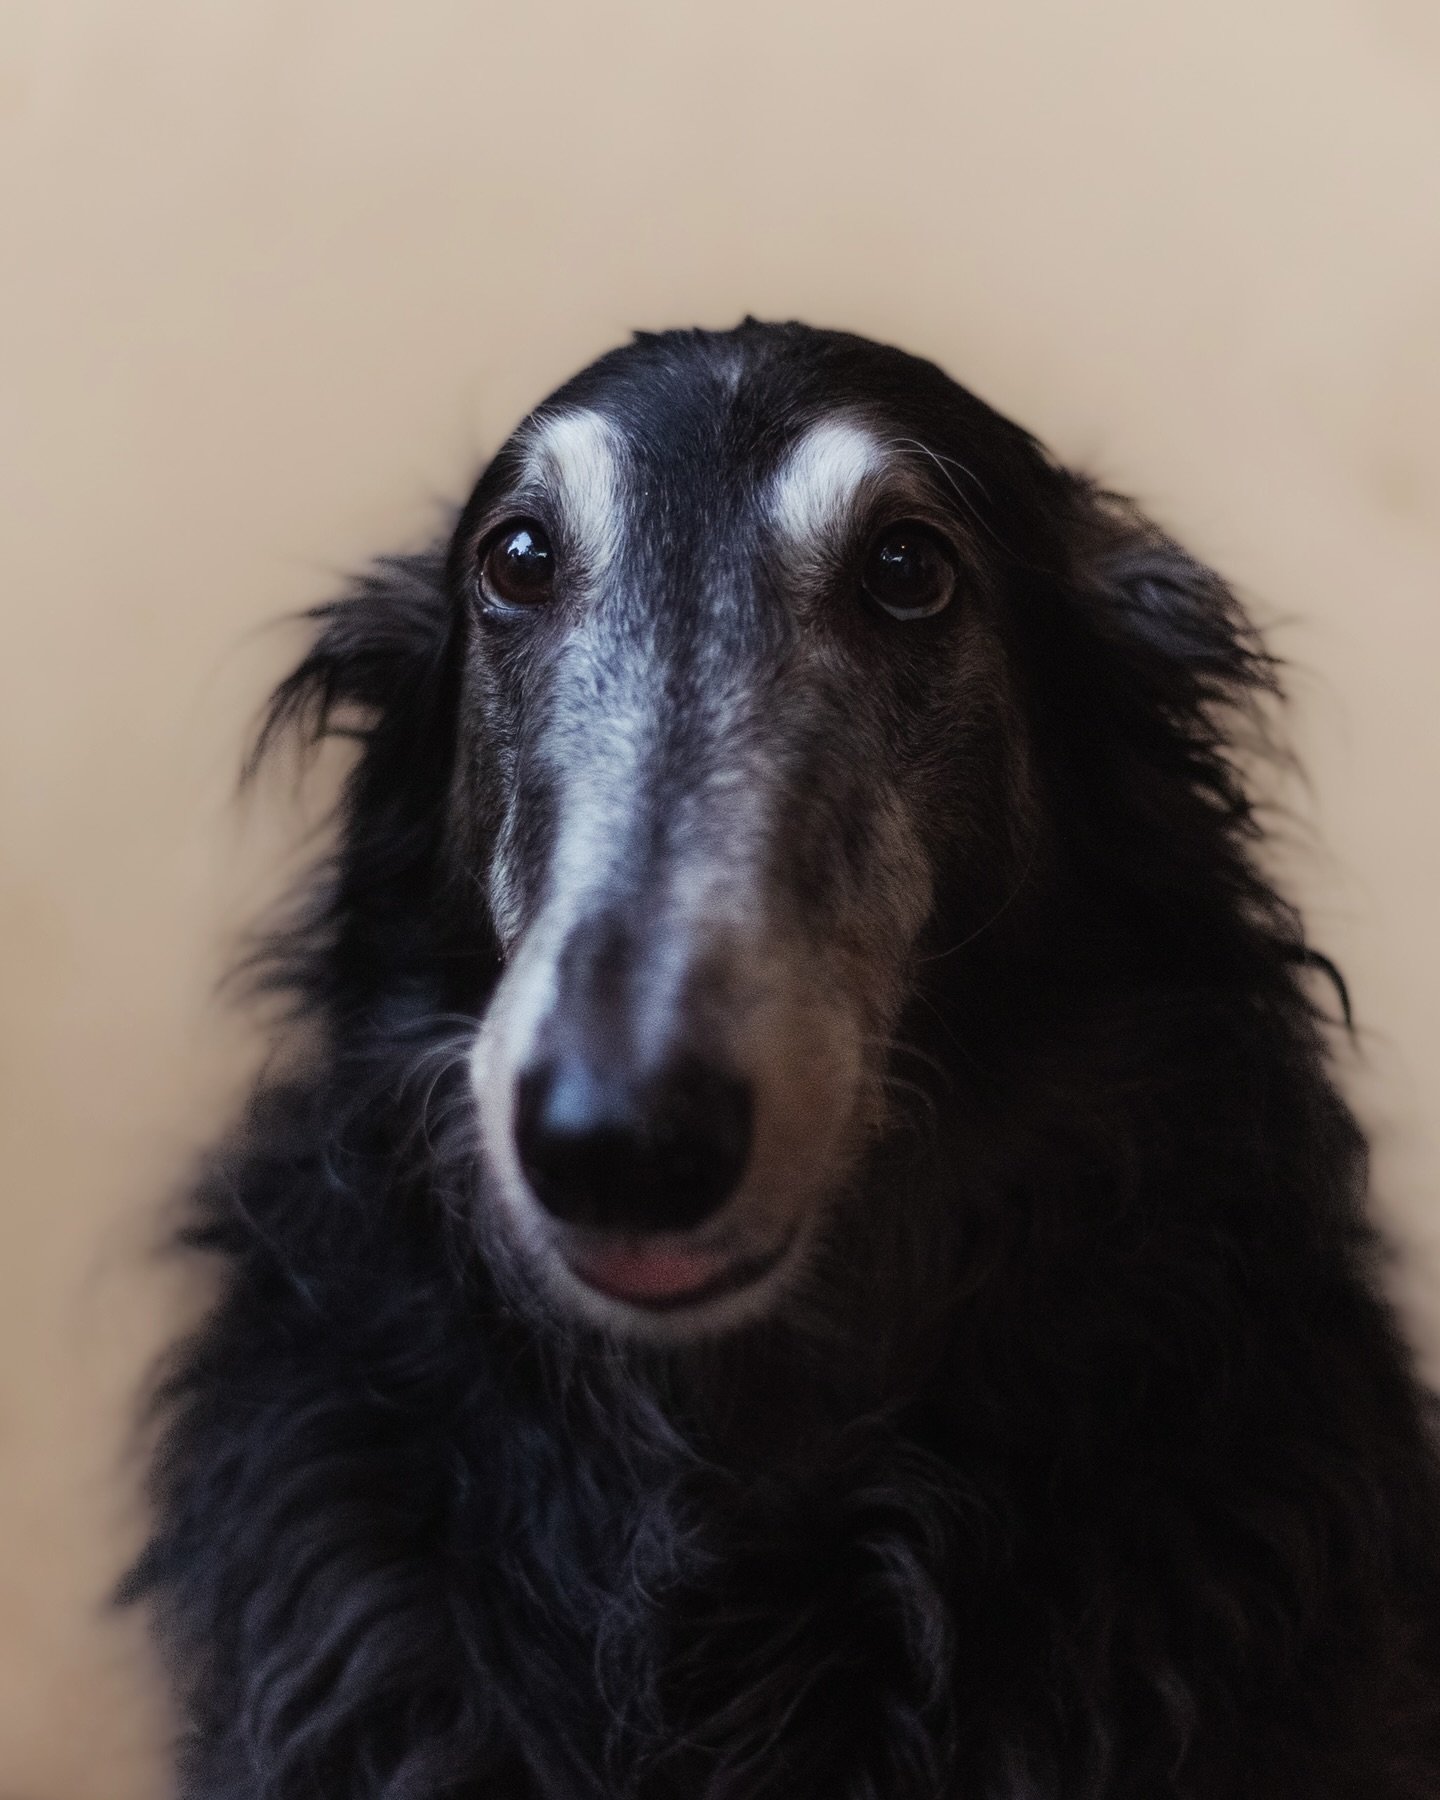 Bandit is TEN YEARS OLD today!! 🎂 

He was my very first borzoi, and was the gateway into so many major life altering things. Hundreds of friendships, photography, competitive dog things, and so much of my art is based on this dog right here. He int